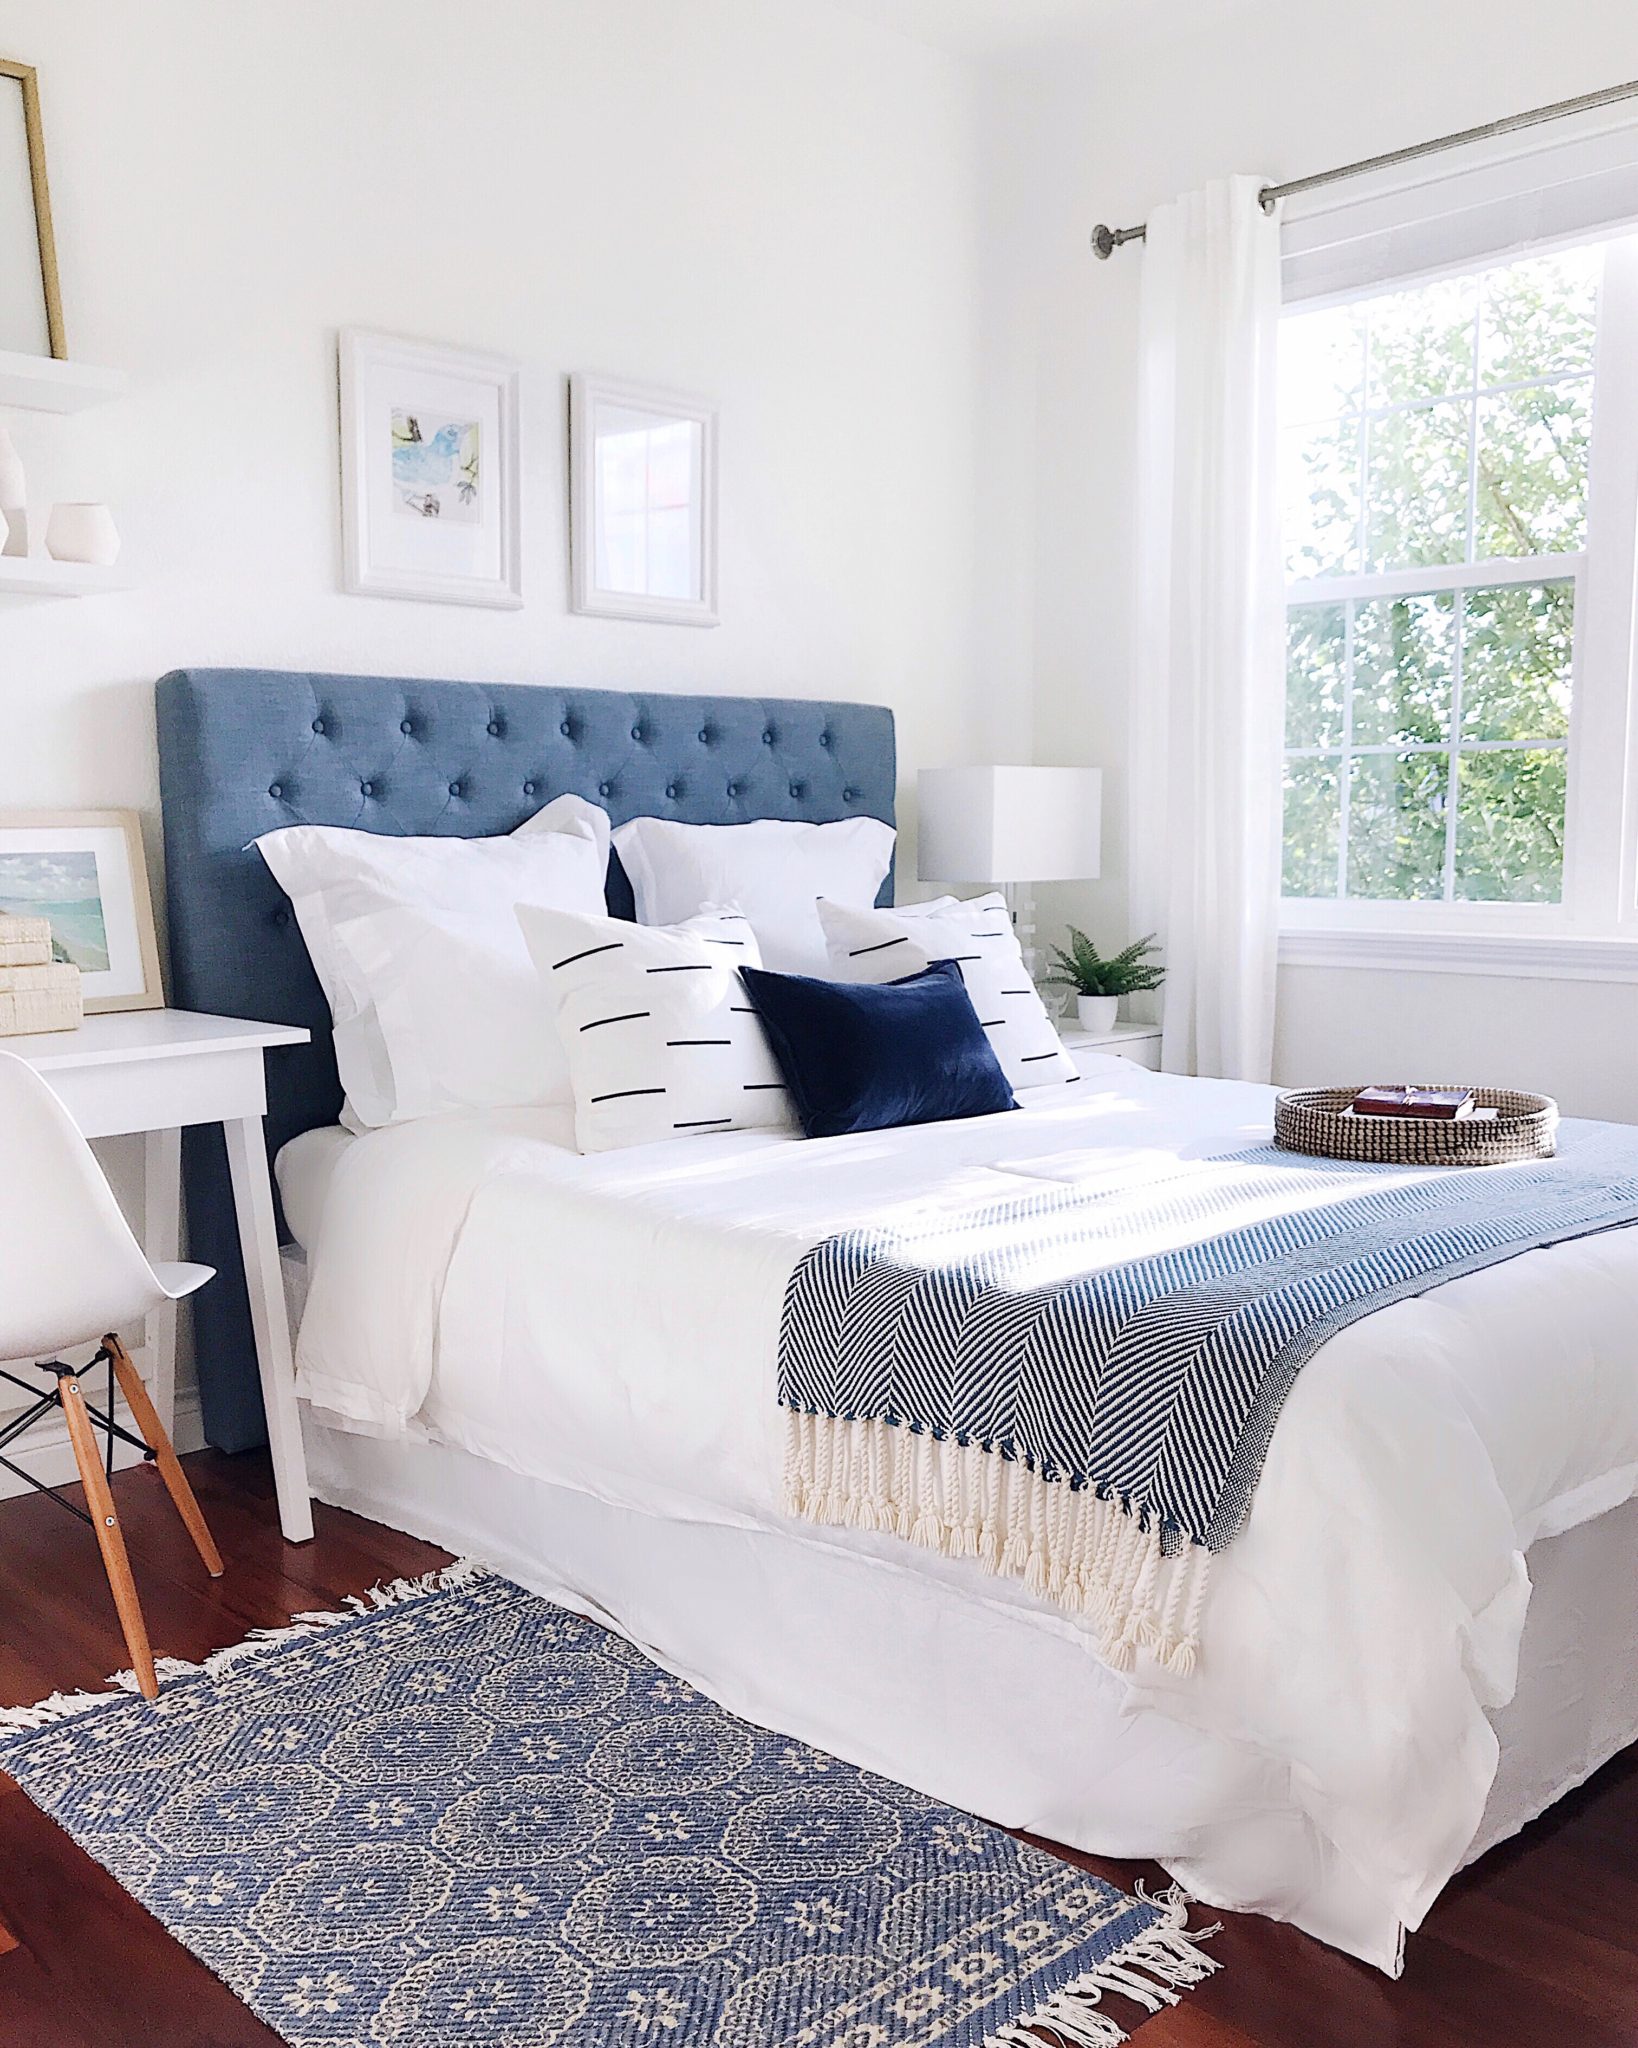 Paint colors in our home: our guest bedroom walls and ceiling are painted with Benjamin Moore White Dove - jane at home